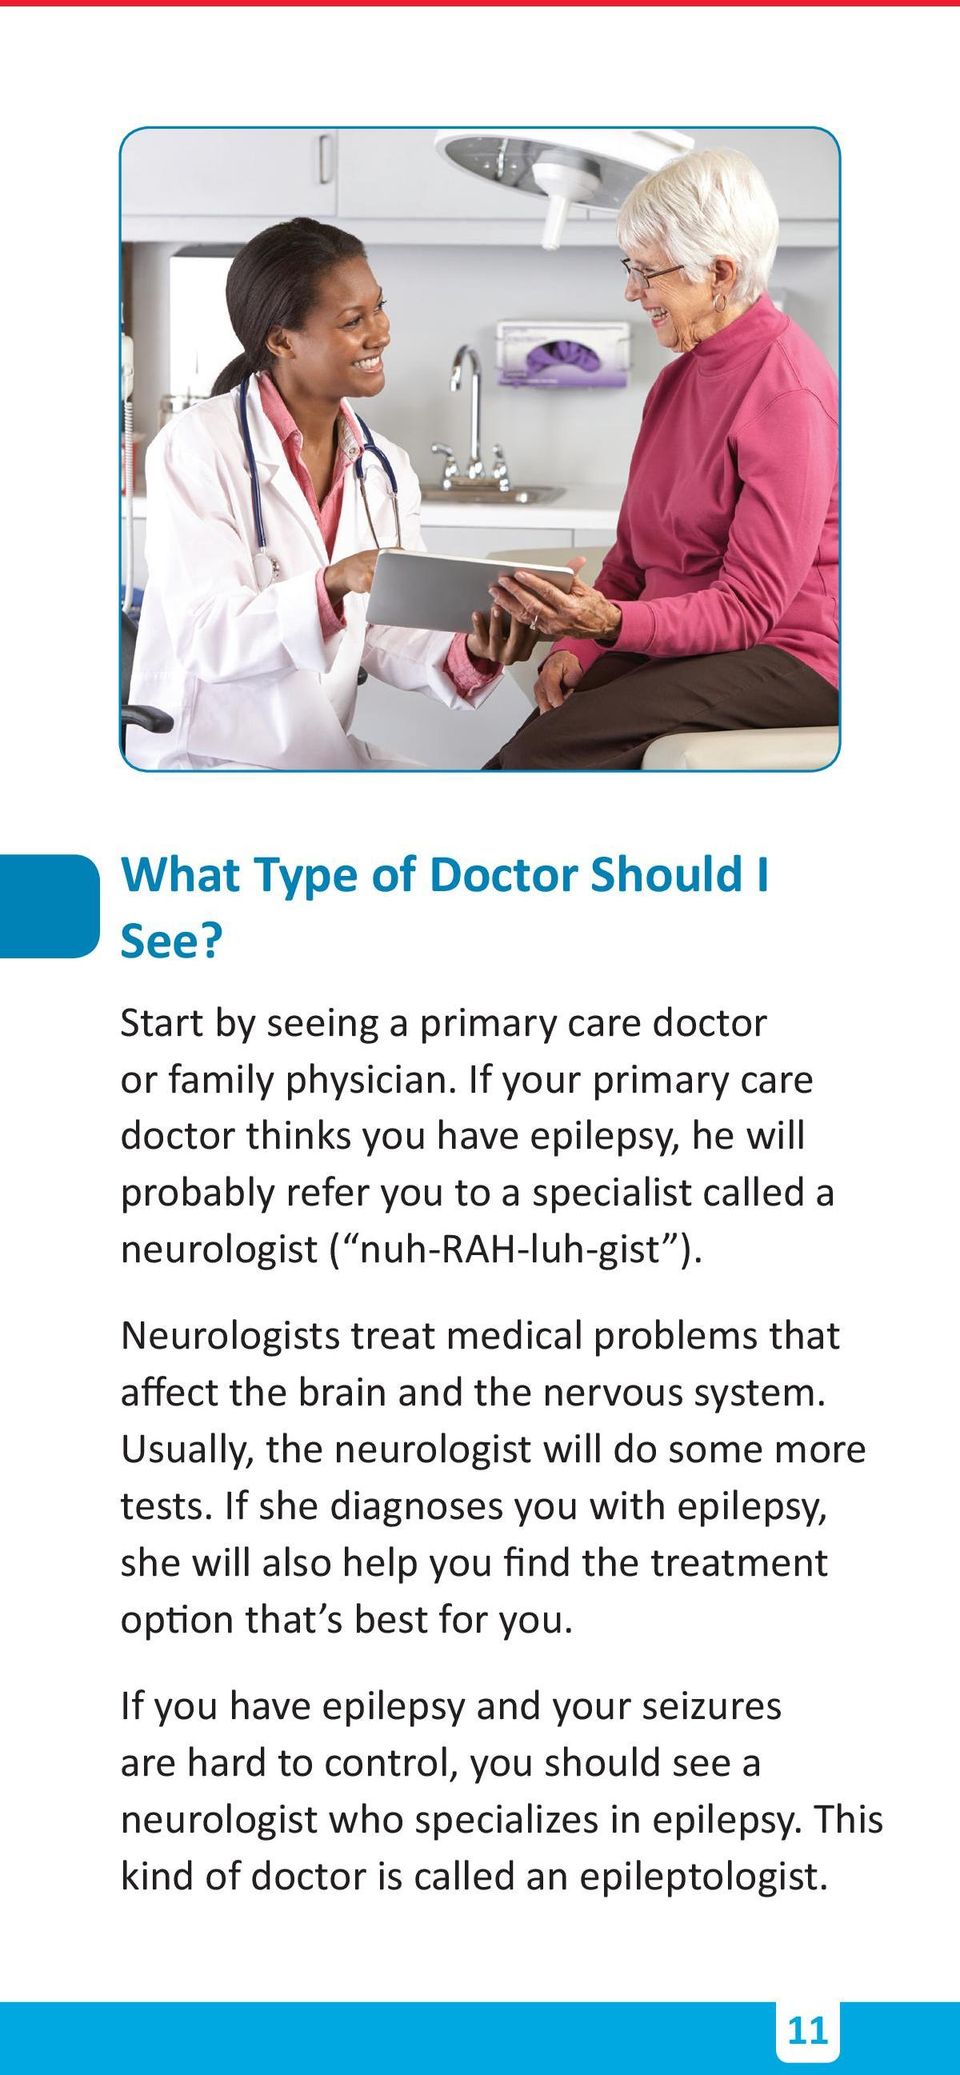 Neurologists treat medical problems that affect the brain and the nervous system. Usually, the neurologist will do some more tests.